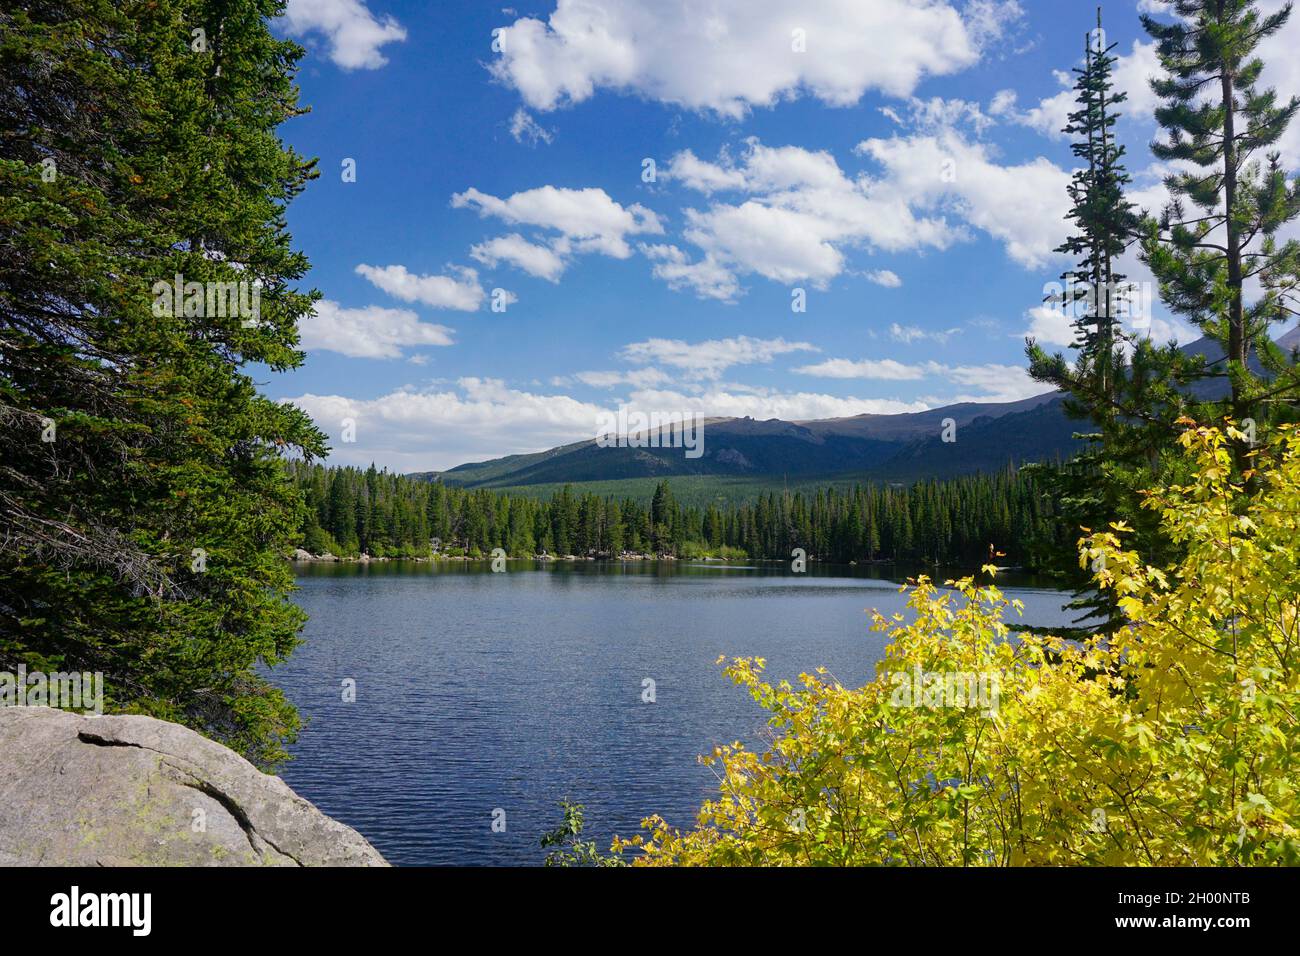 View of Bear Lake in RMNP framed with trees, bushes and rocks Stock Photo